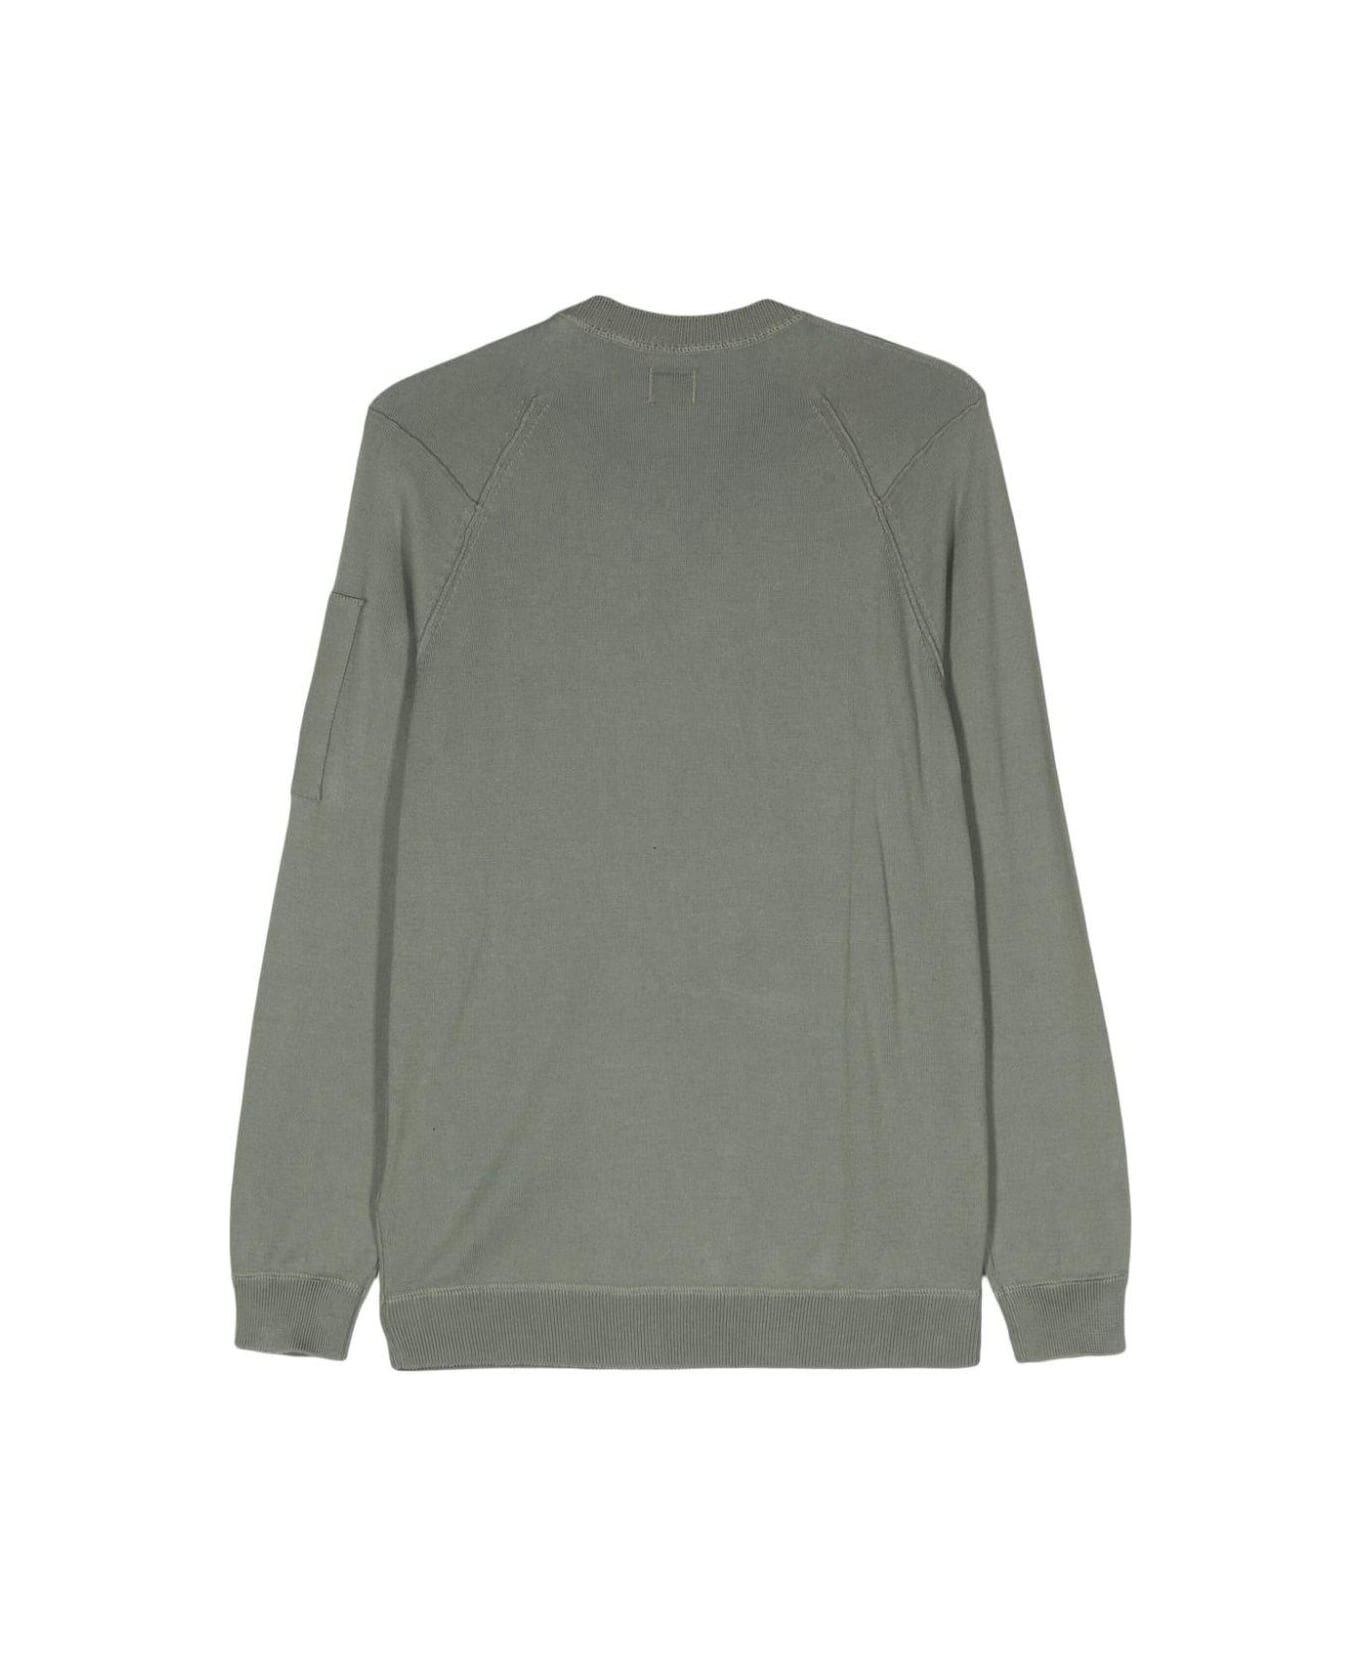 C.P. Company Len-detailed Sleeved Sweater - Green